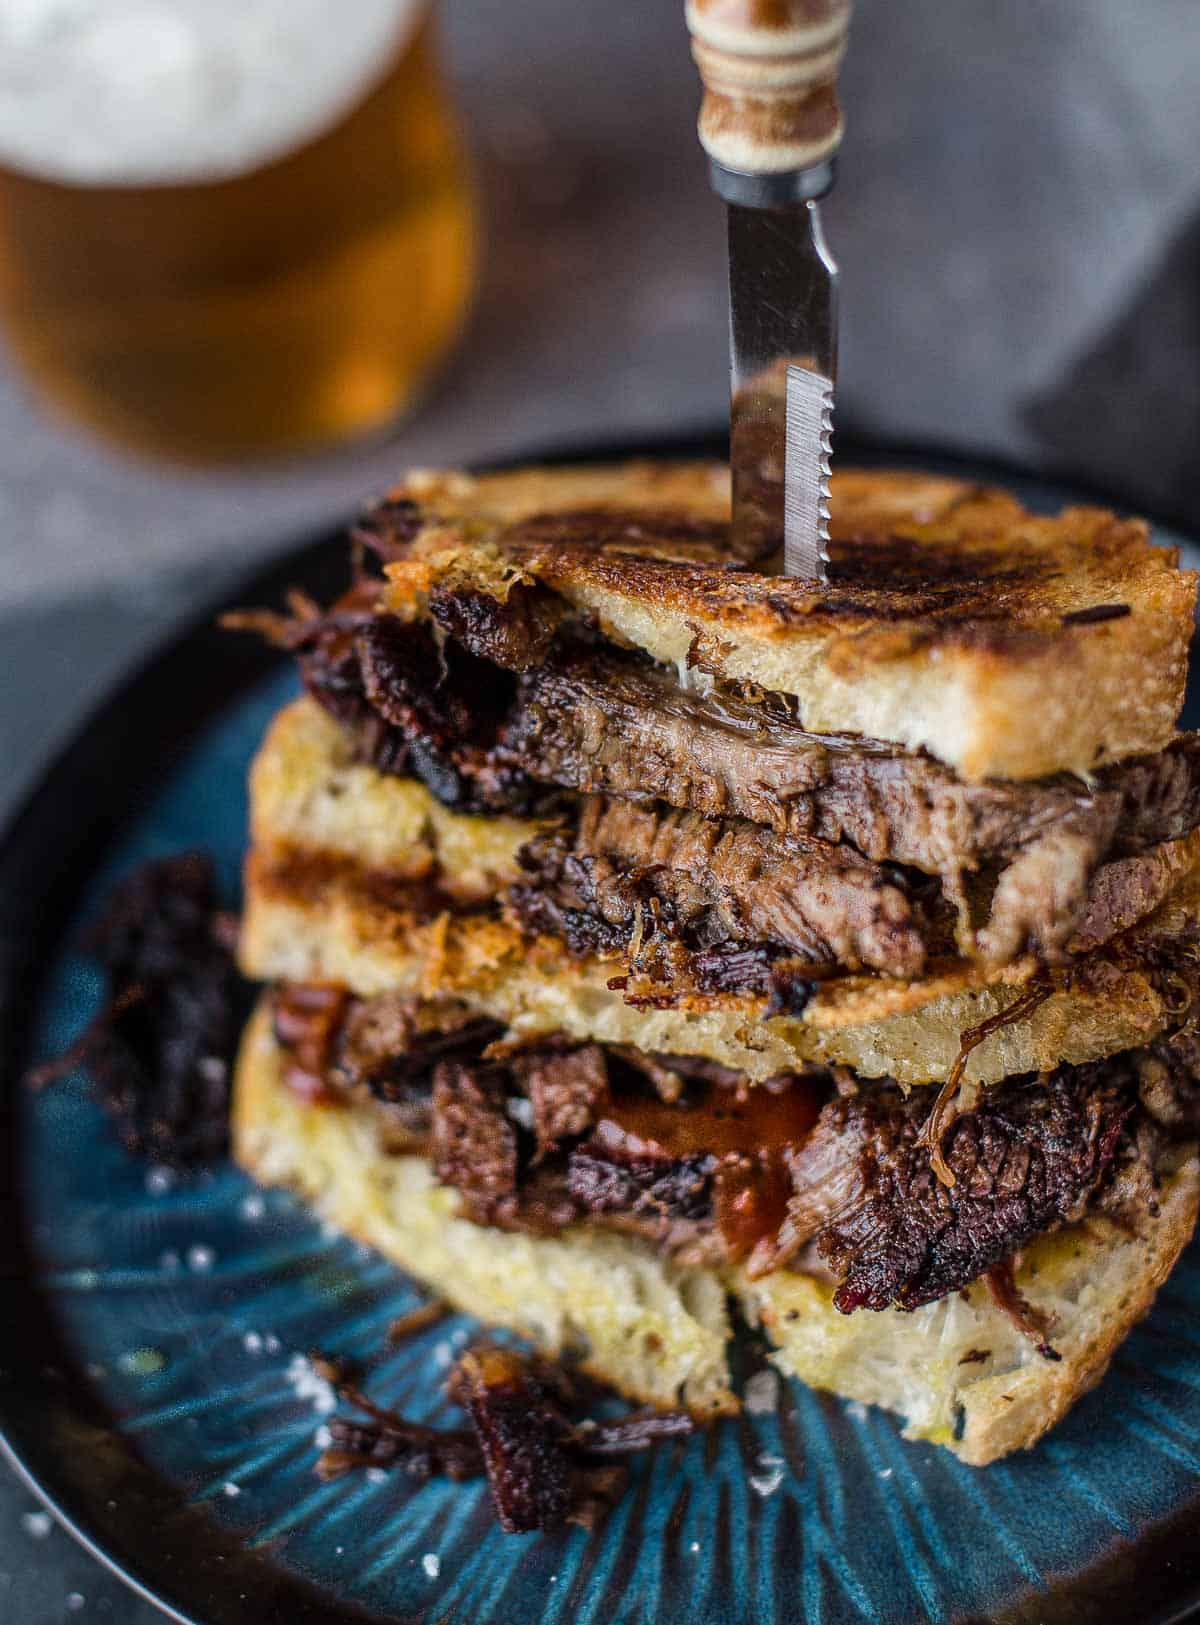 A brisket grilled cheese sandwich with a glass of beer 